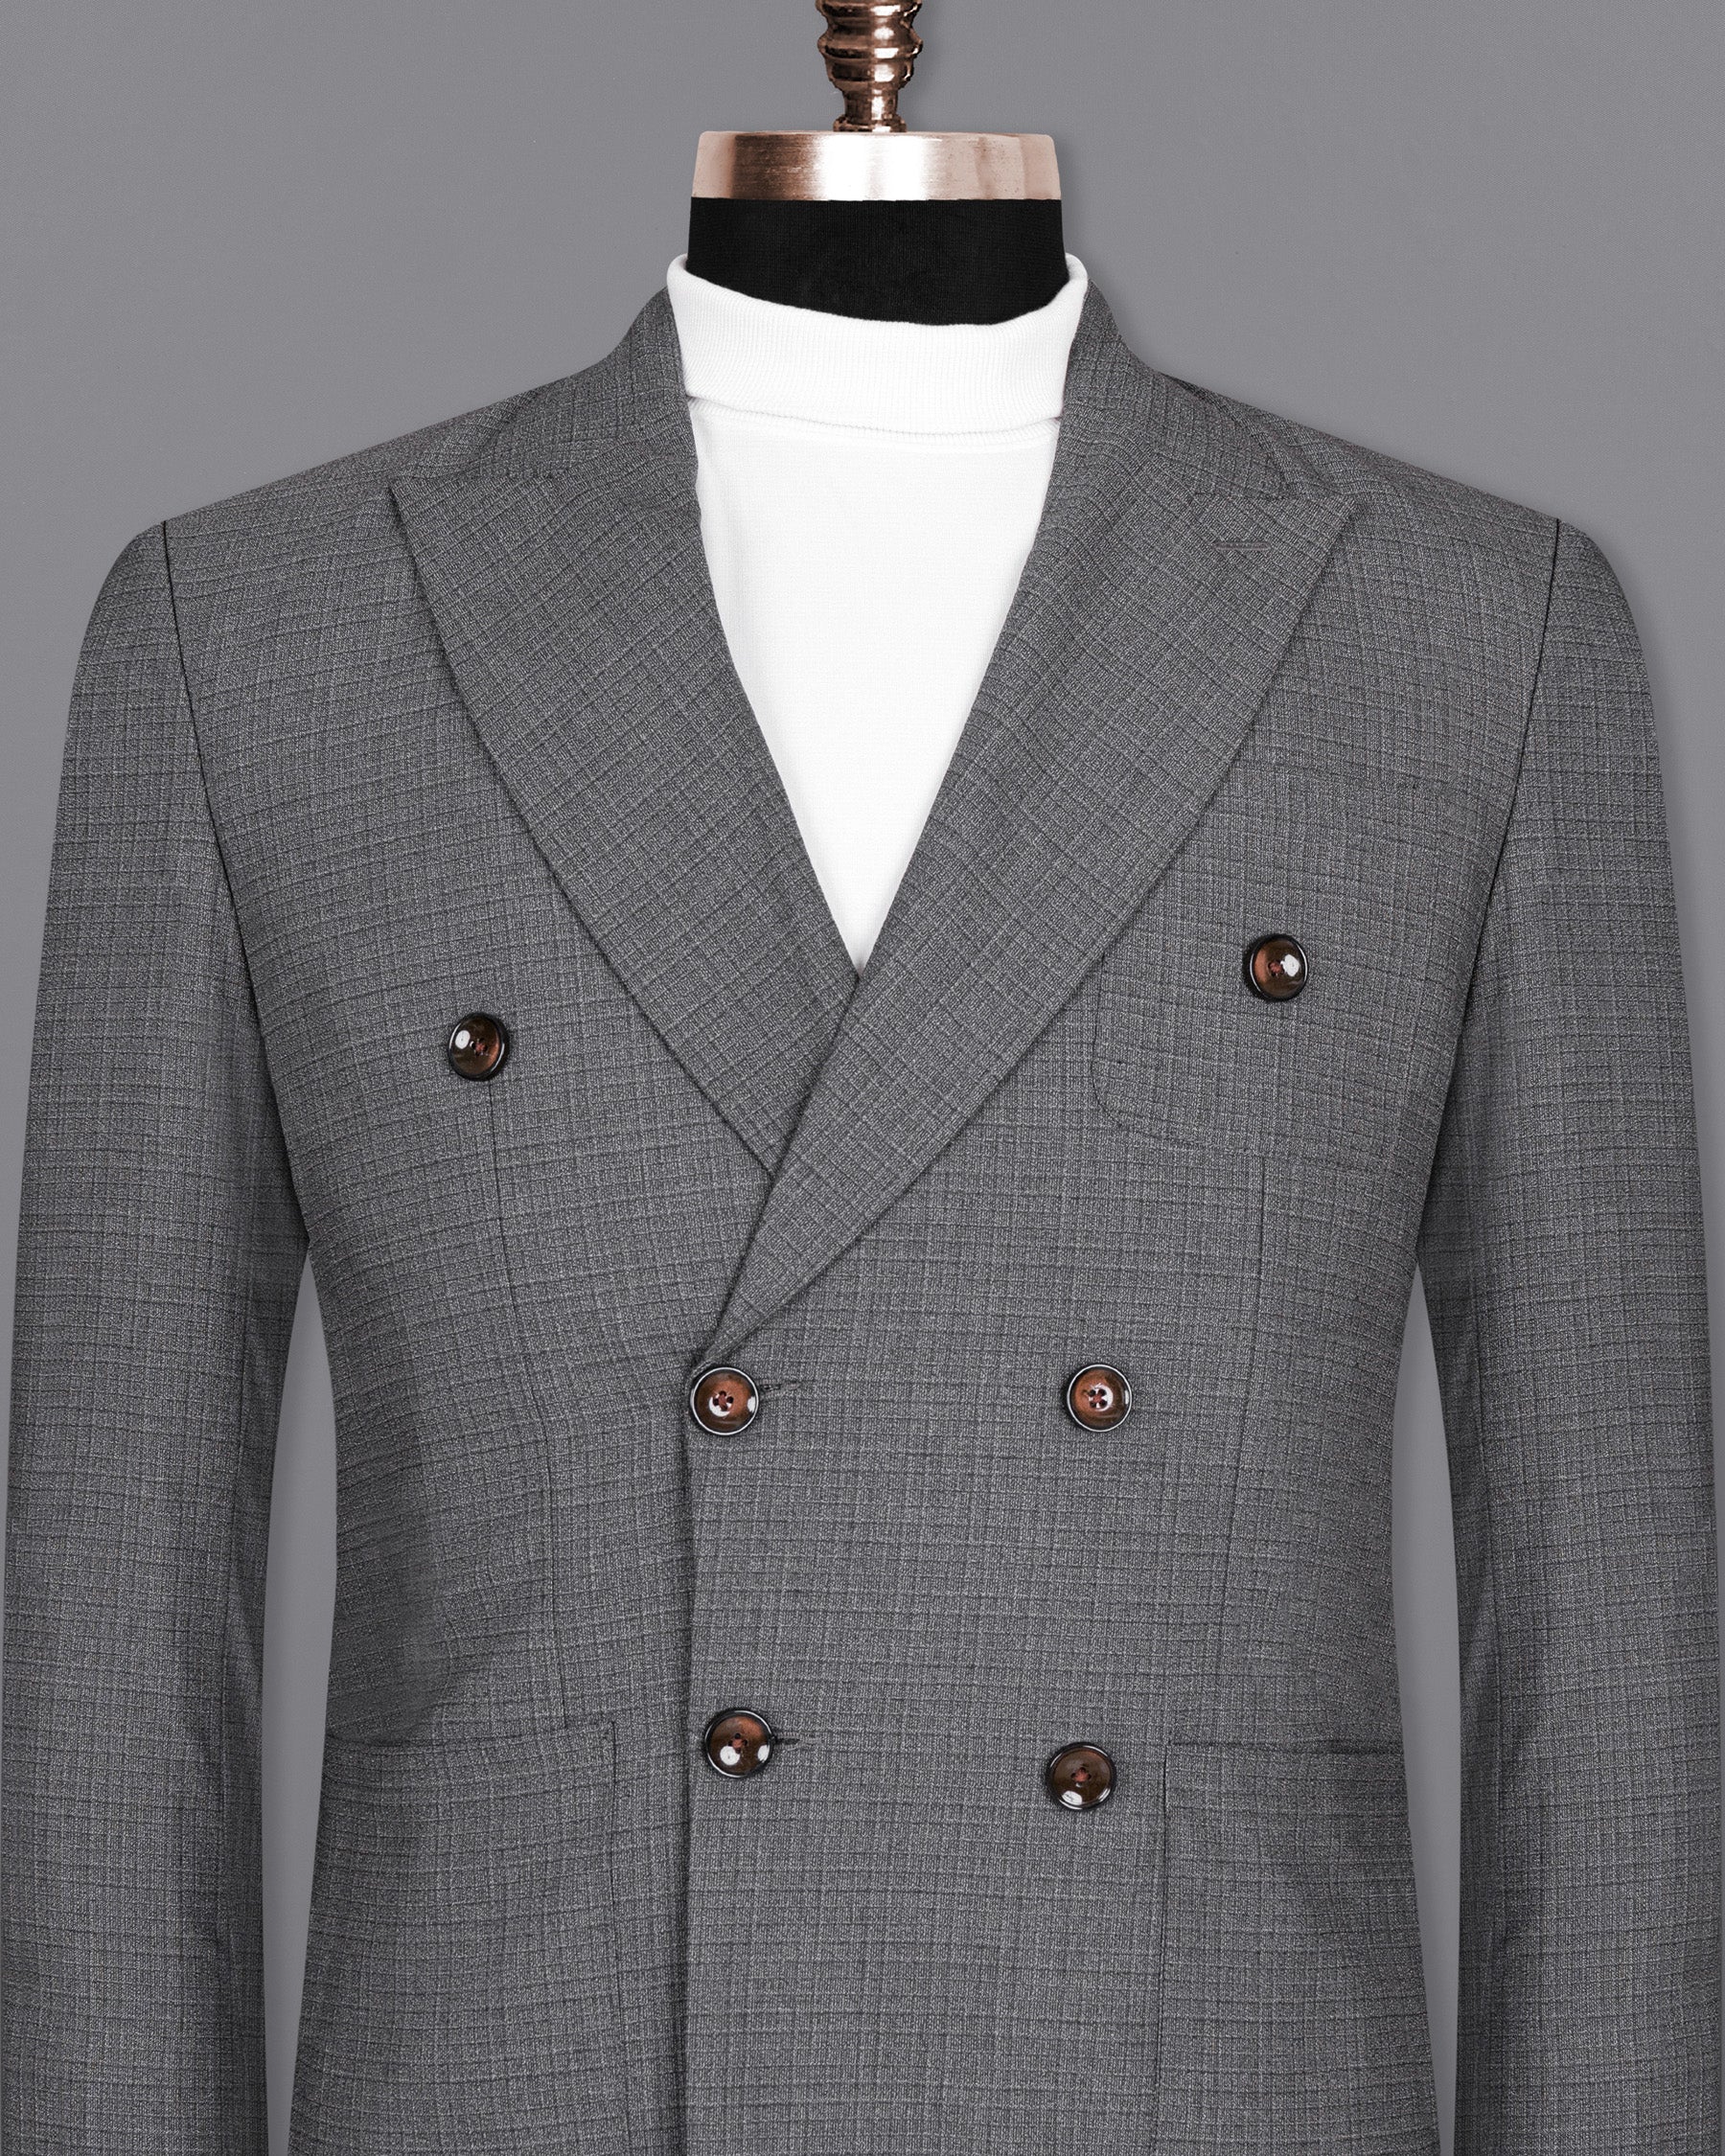 Fuscous Gray Chequered Double Breasted Wool Rich Sports Blazer BL1448-DB-PP-36,BL1448-DB-PP-38,BL1448-DB-PP-40,BL1448-DB-PP-42,BL1448-DB-PP-44,BL1448-DB-PP-46,BL1448-DB-PP-48,BL1448-DB-PP-50,BL1448-DB-PP-52,BL1448-DB-PP-54,BL1448-DB-PP-56,BL1448-DB-PP-58,BL1448-DB-PP-60